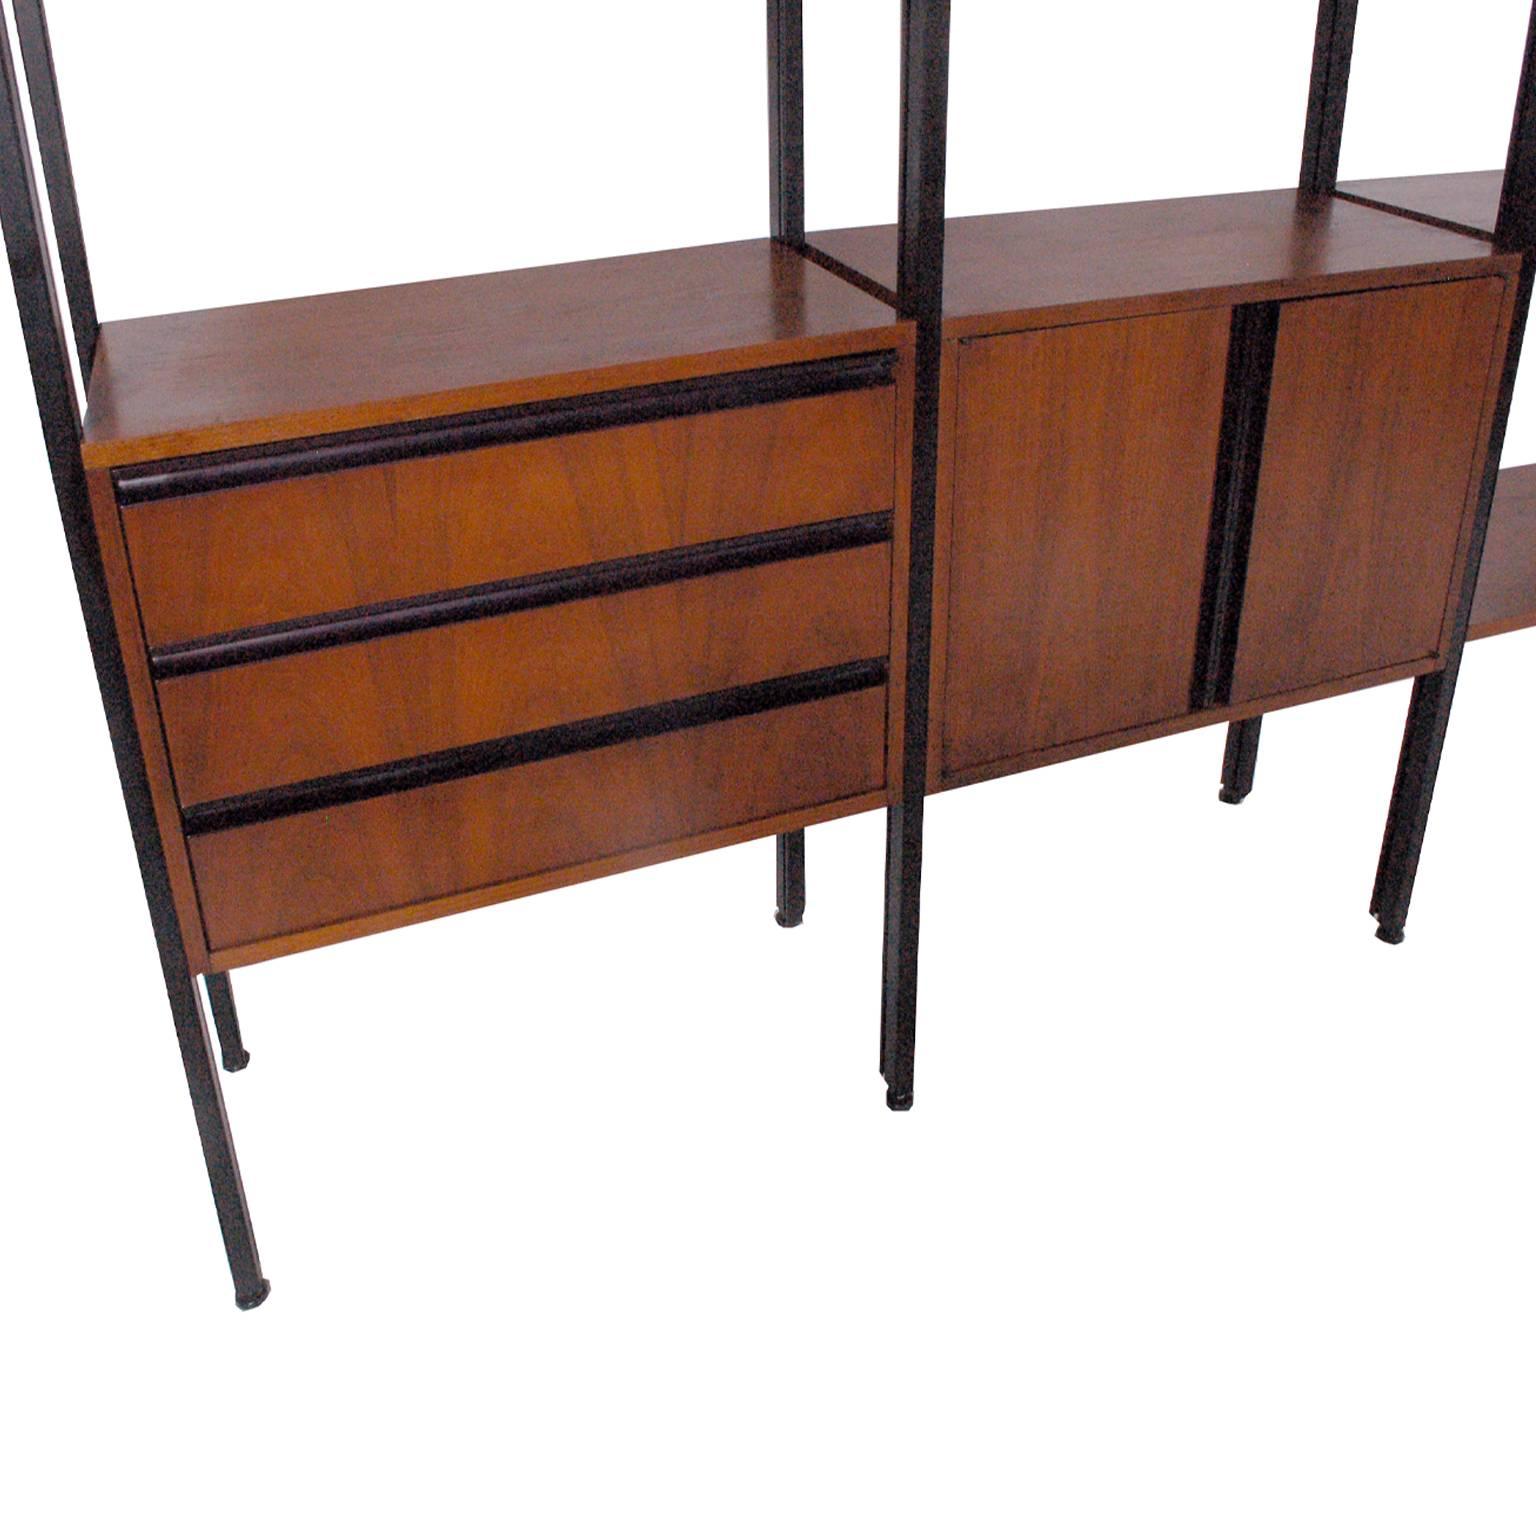 Eight pole room divider, walnut with extruded aluminum poles, anodized black finish. Three-drawer chest and two door section. Adjustable shelves. Designed by William Katavolos, Robert Gargiule, associates at George Nelson's office. Documented at